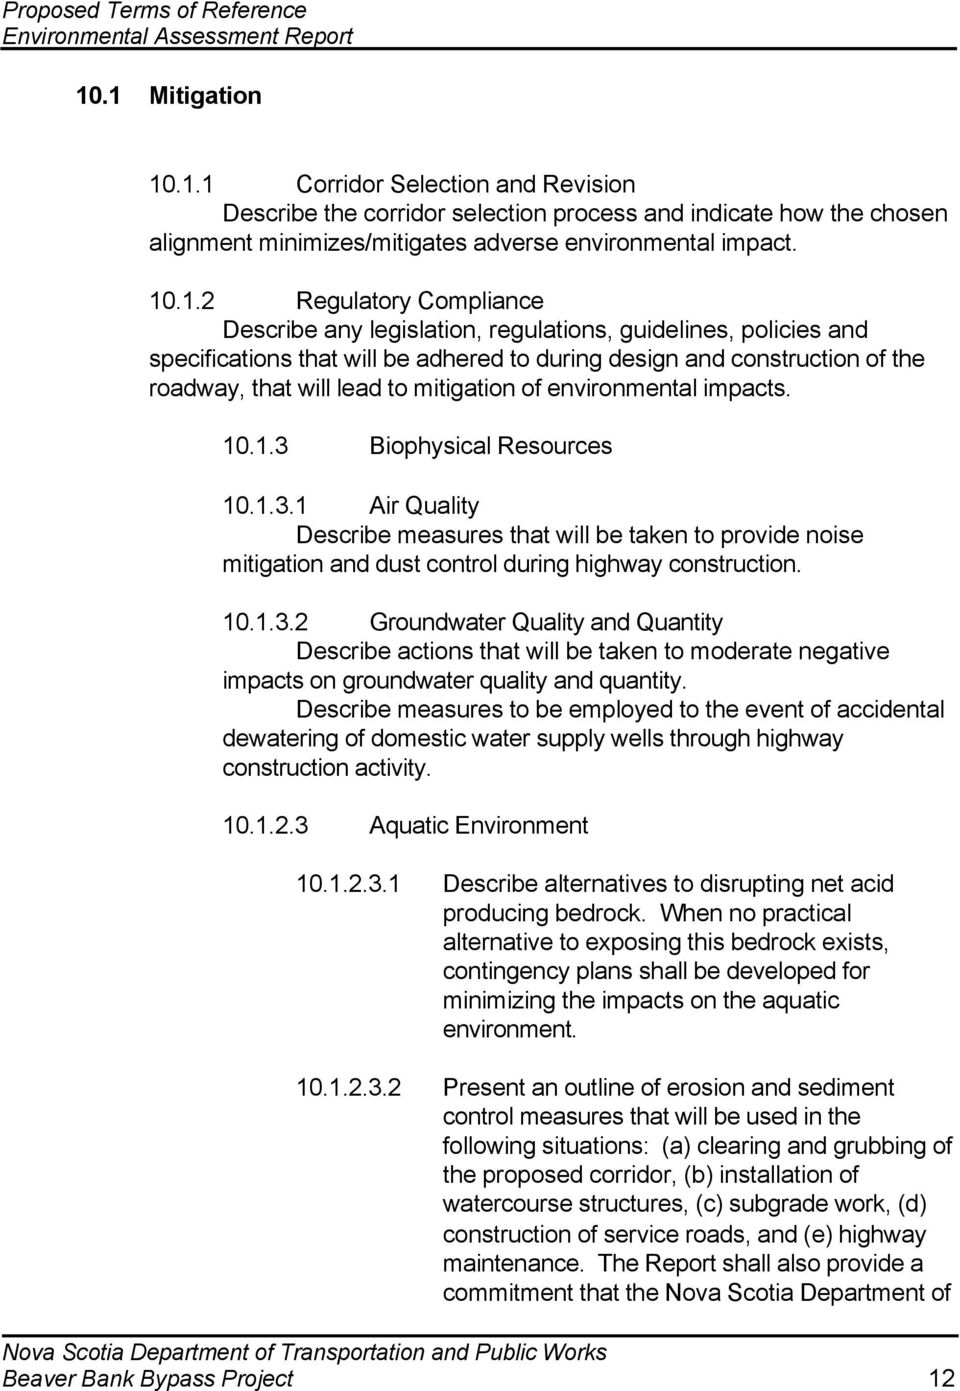 mitigation of environmental impacts. 10.1.3 Biophysical Resources 10.1.3.1 Air Quality Describe measures that will be taken to provide noise mitigation and dust control during highway construction.